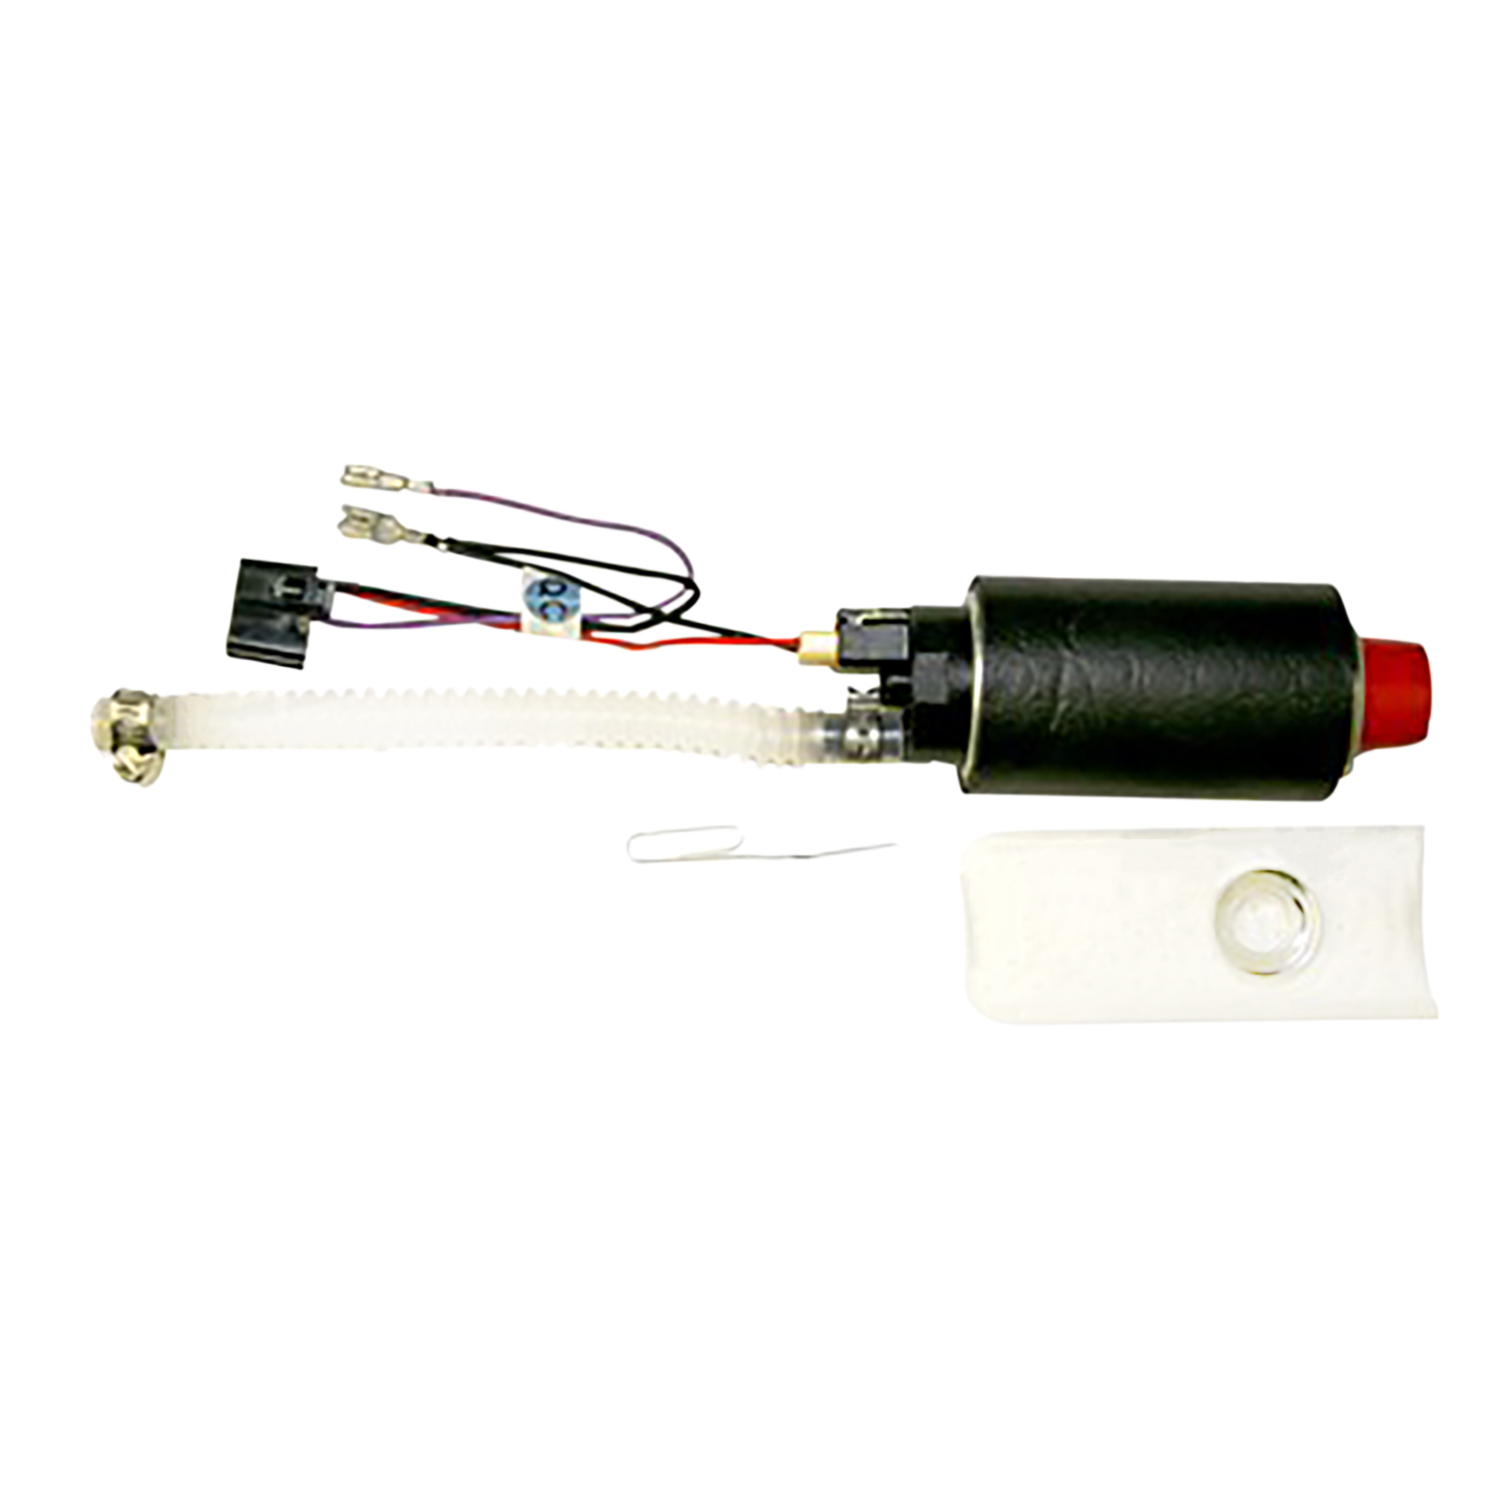 BLT1 Fuel Pump Kit (RXP255) - DISC* REPLACED WITH RFPK-014 (RFPK 